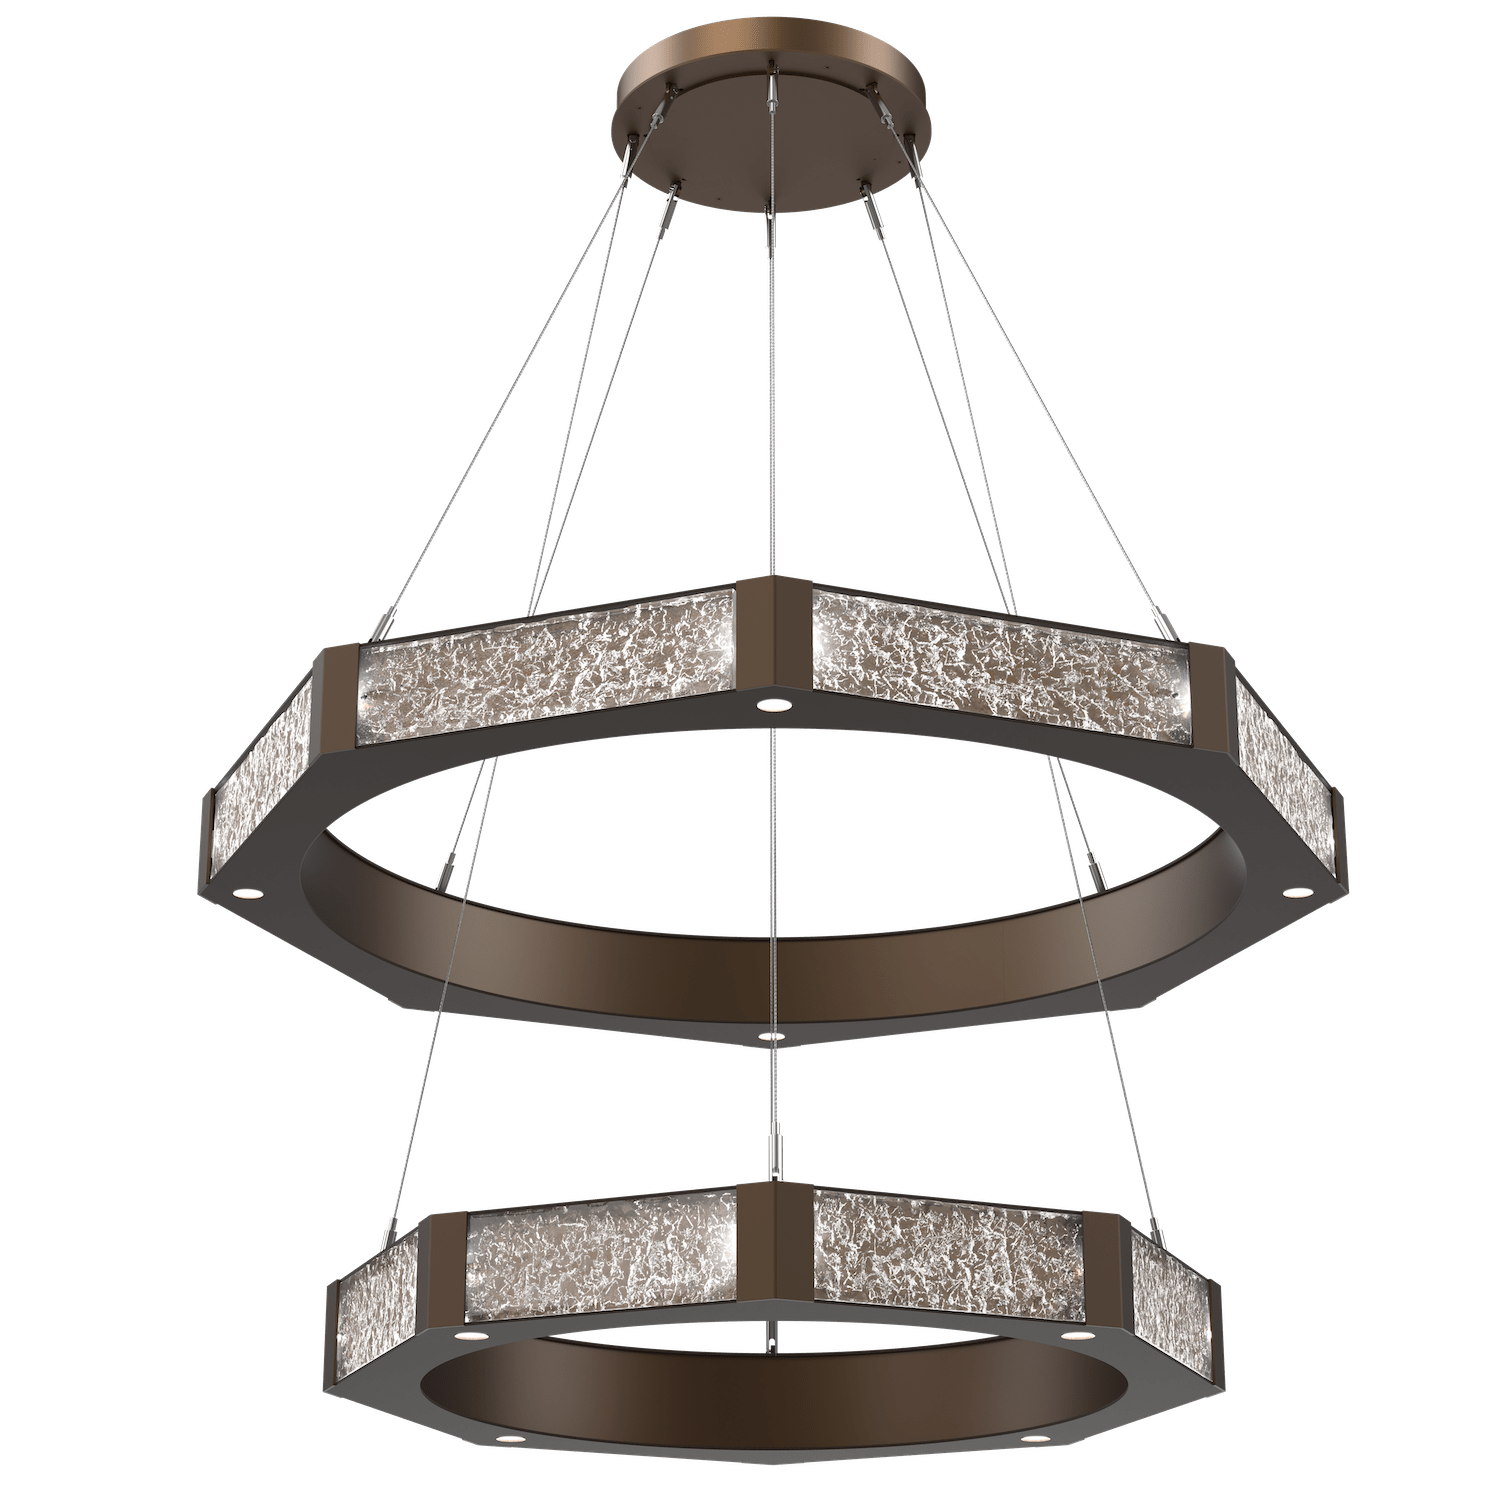 CHB0061-2B-FB-GC-Hammerton-Studio-Glacier-48-inch-two-tier-ring-chandelier-with-flat-bronze-finish-and-clear-blown-glass-with-geo-clear-cast-glass-diffusers-and-LED-lamping